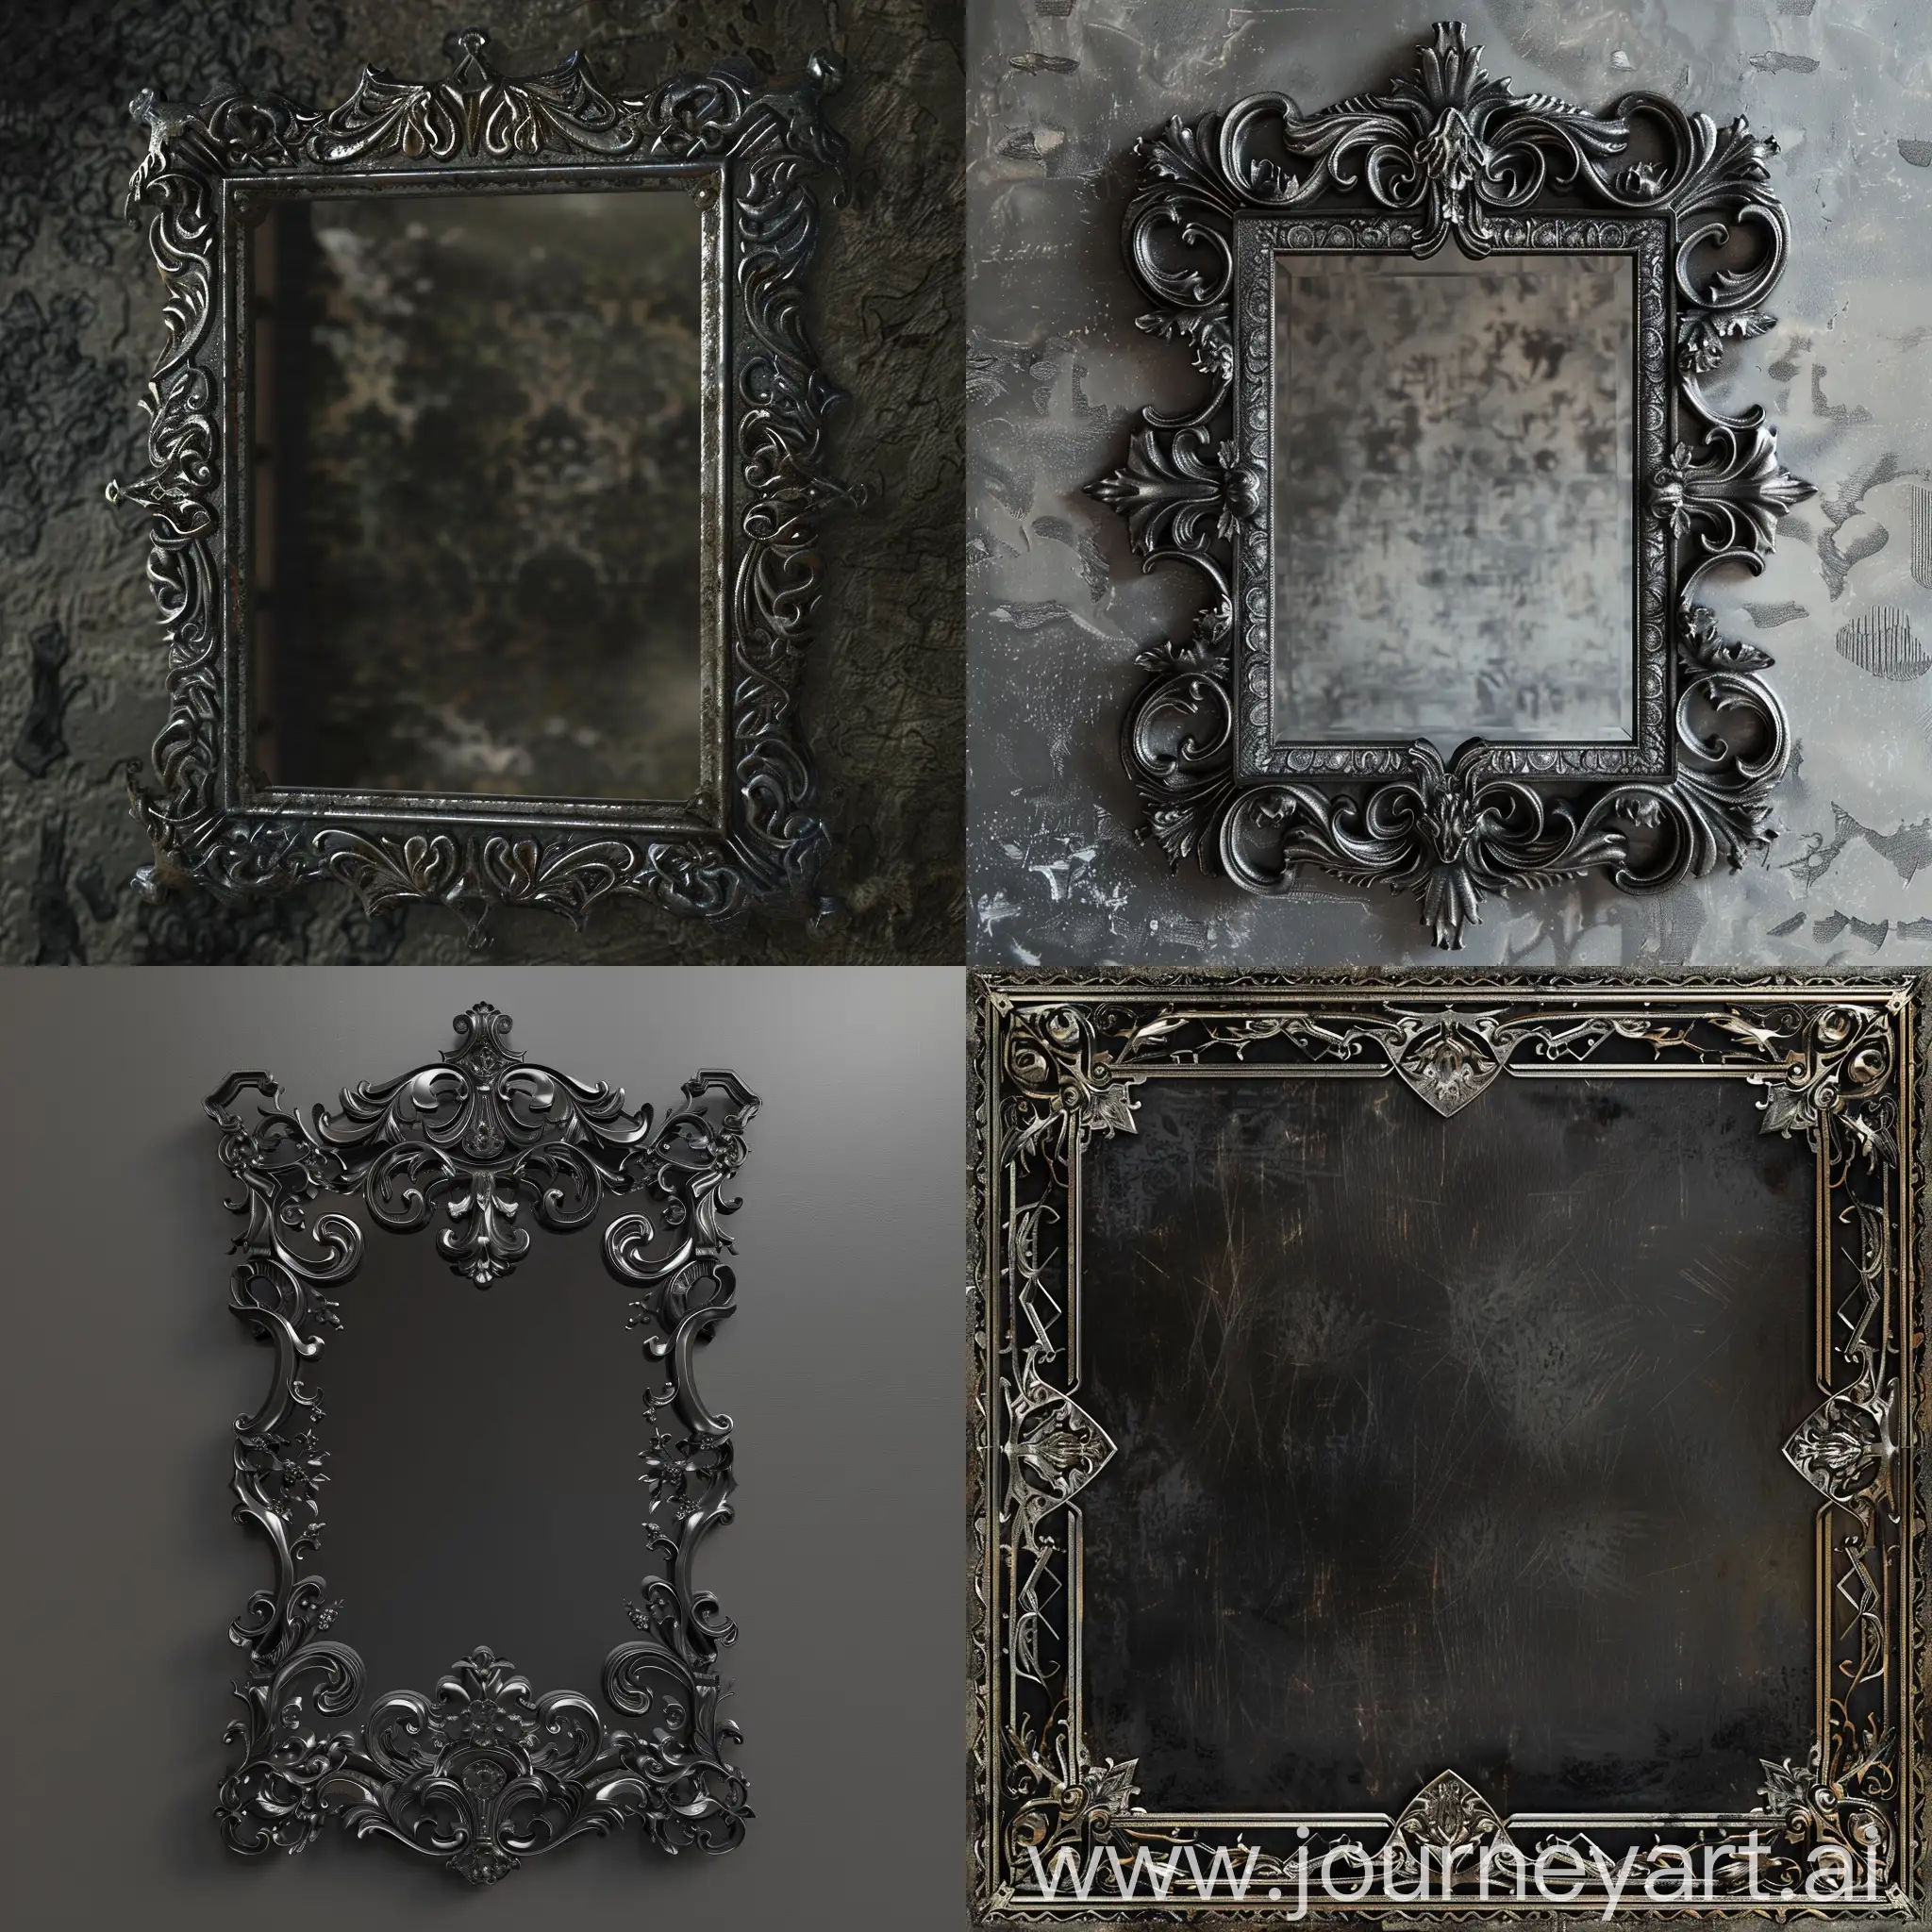 The mirror has an elegant and exquisite frame made of dark wood with silver patterns. These patterns may glow slightly, drawing attention to the mirror. "Pixel Game" "Old game" "2d game" "Pixel art" ПИКСЕЛЬ АРТ